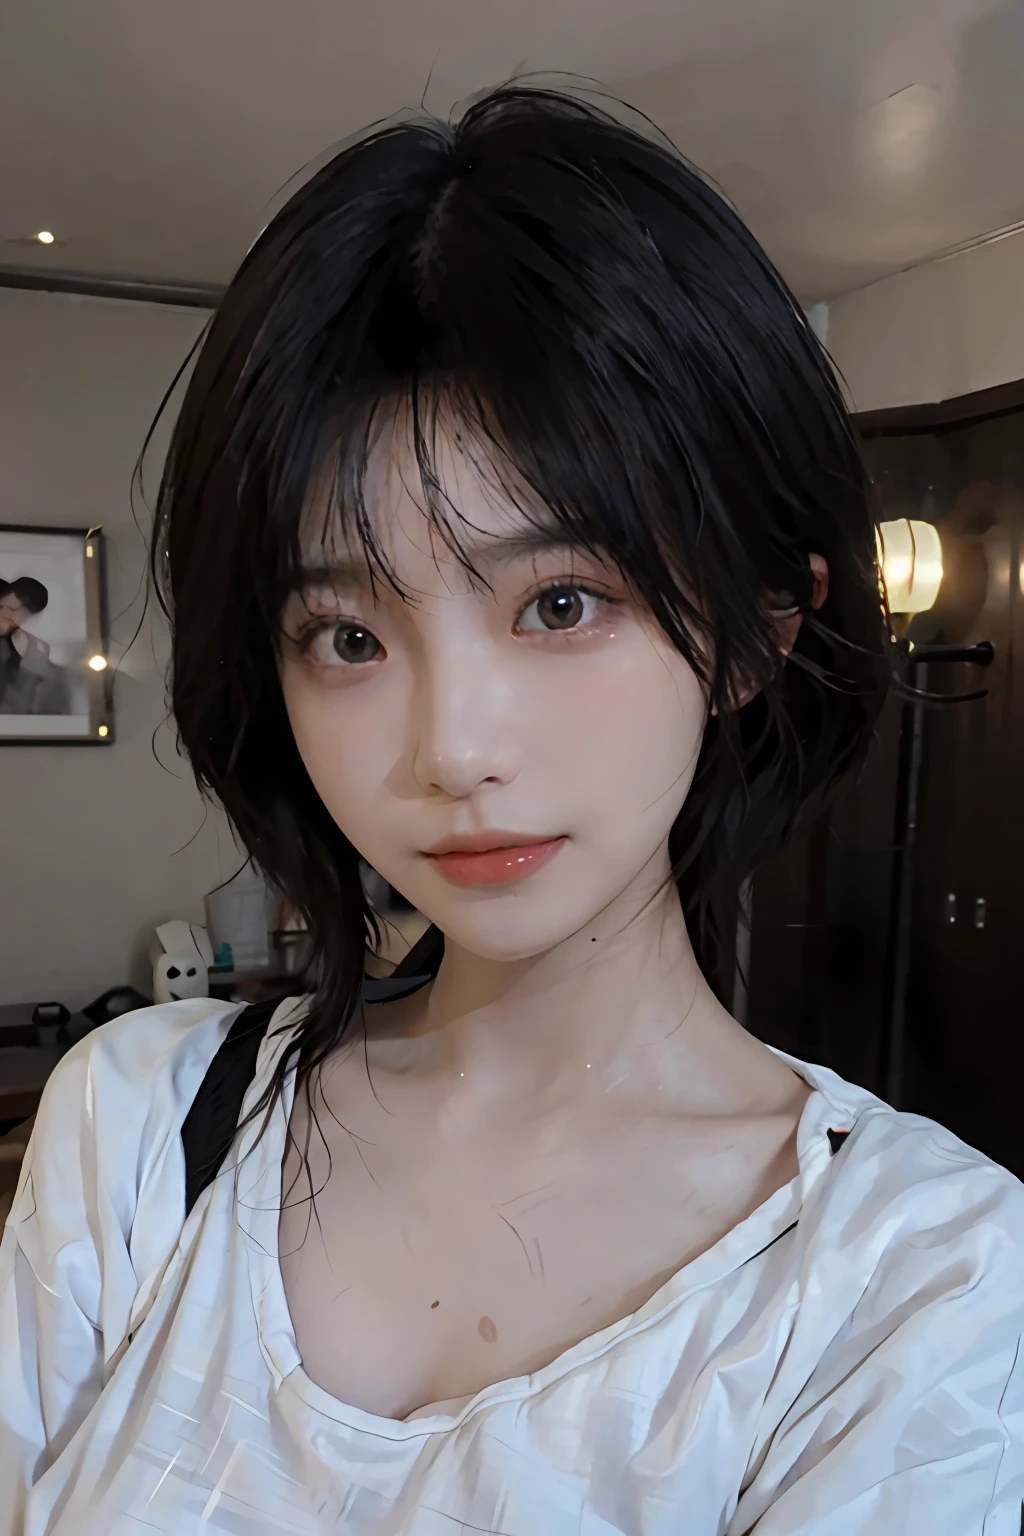 ((Top Quality, 8k, Masterpiece: 1.3)),detailed eyes,best quality,ultra high definition (reality:1.4),professional photo,1girl,professional lighting,Korean girl,beauty korean girl,cute korean girl,
detailed skin,beautiful skin,messy hair,black hair,bobcut,(ultra realistic),(dropping tits: 1.2),,medium ,black microbikini,sweating,detailed face,empty white room,(ultra detailed),(beautifully detailed eyes),detailed face
,Double Eyelids, shiny skin,